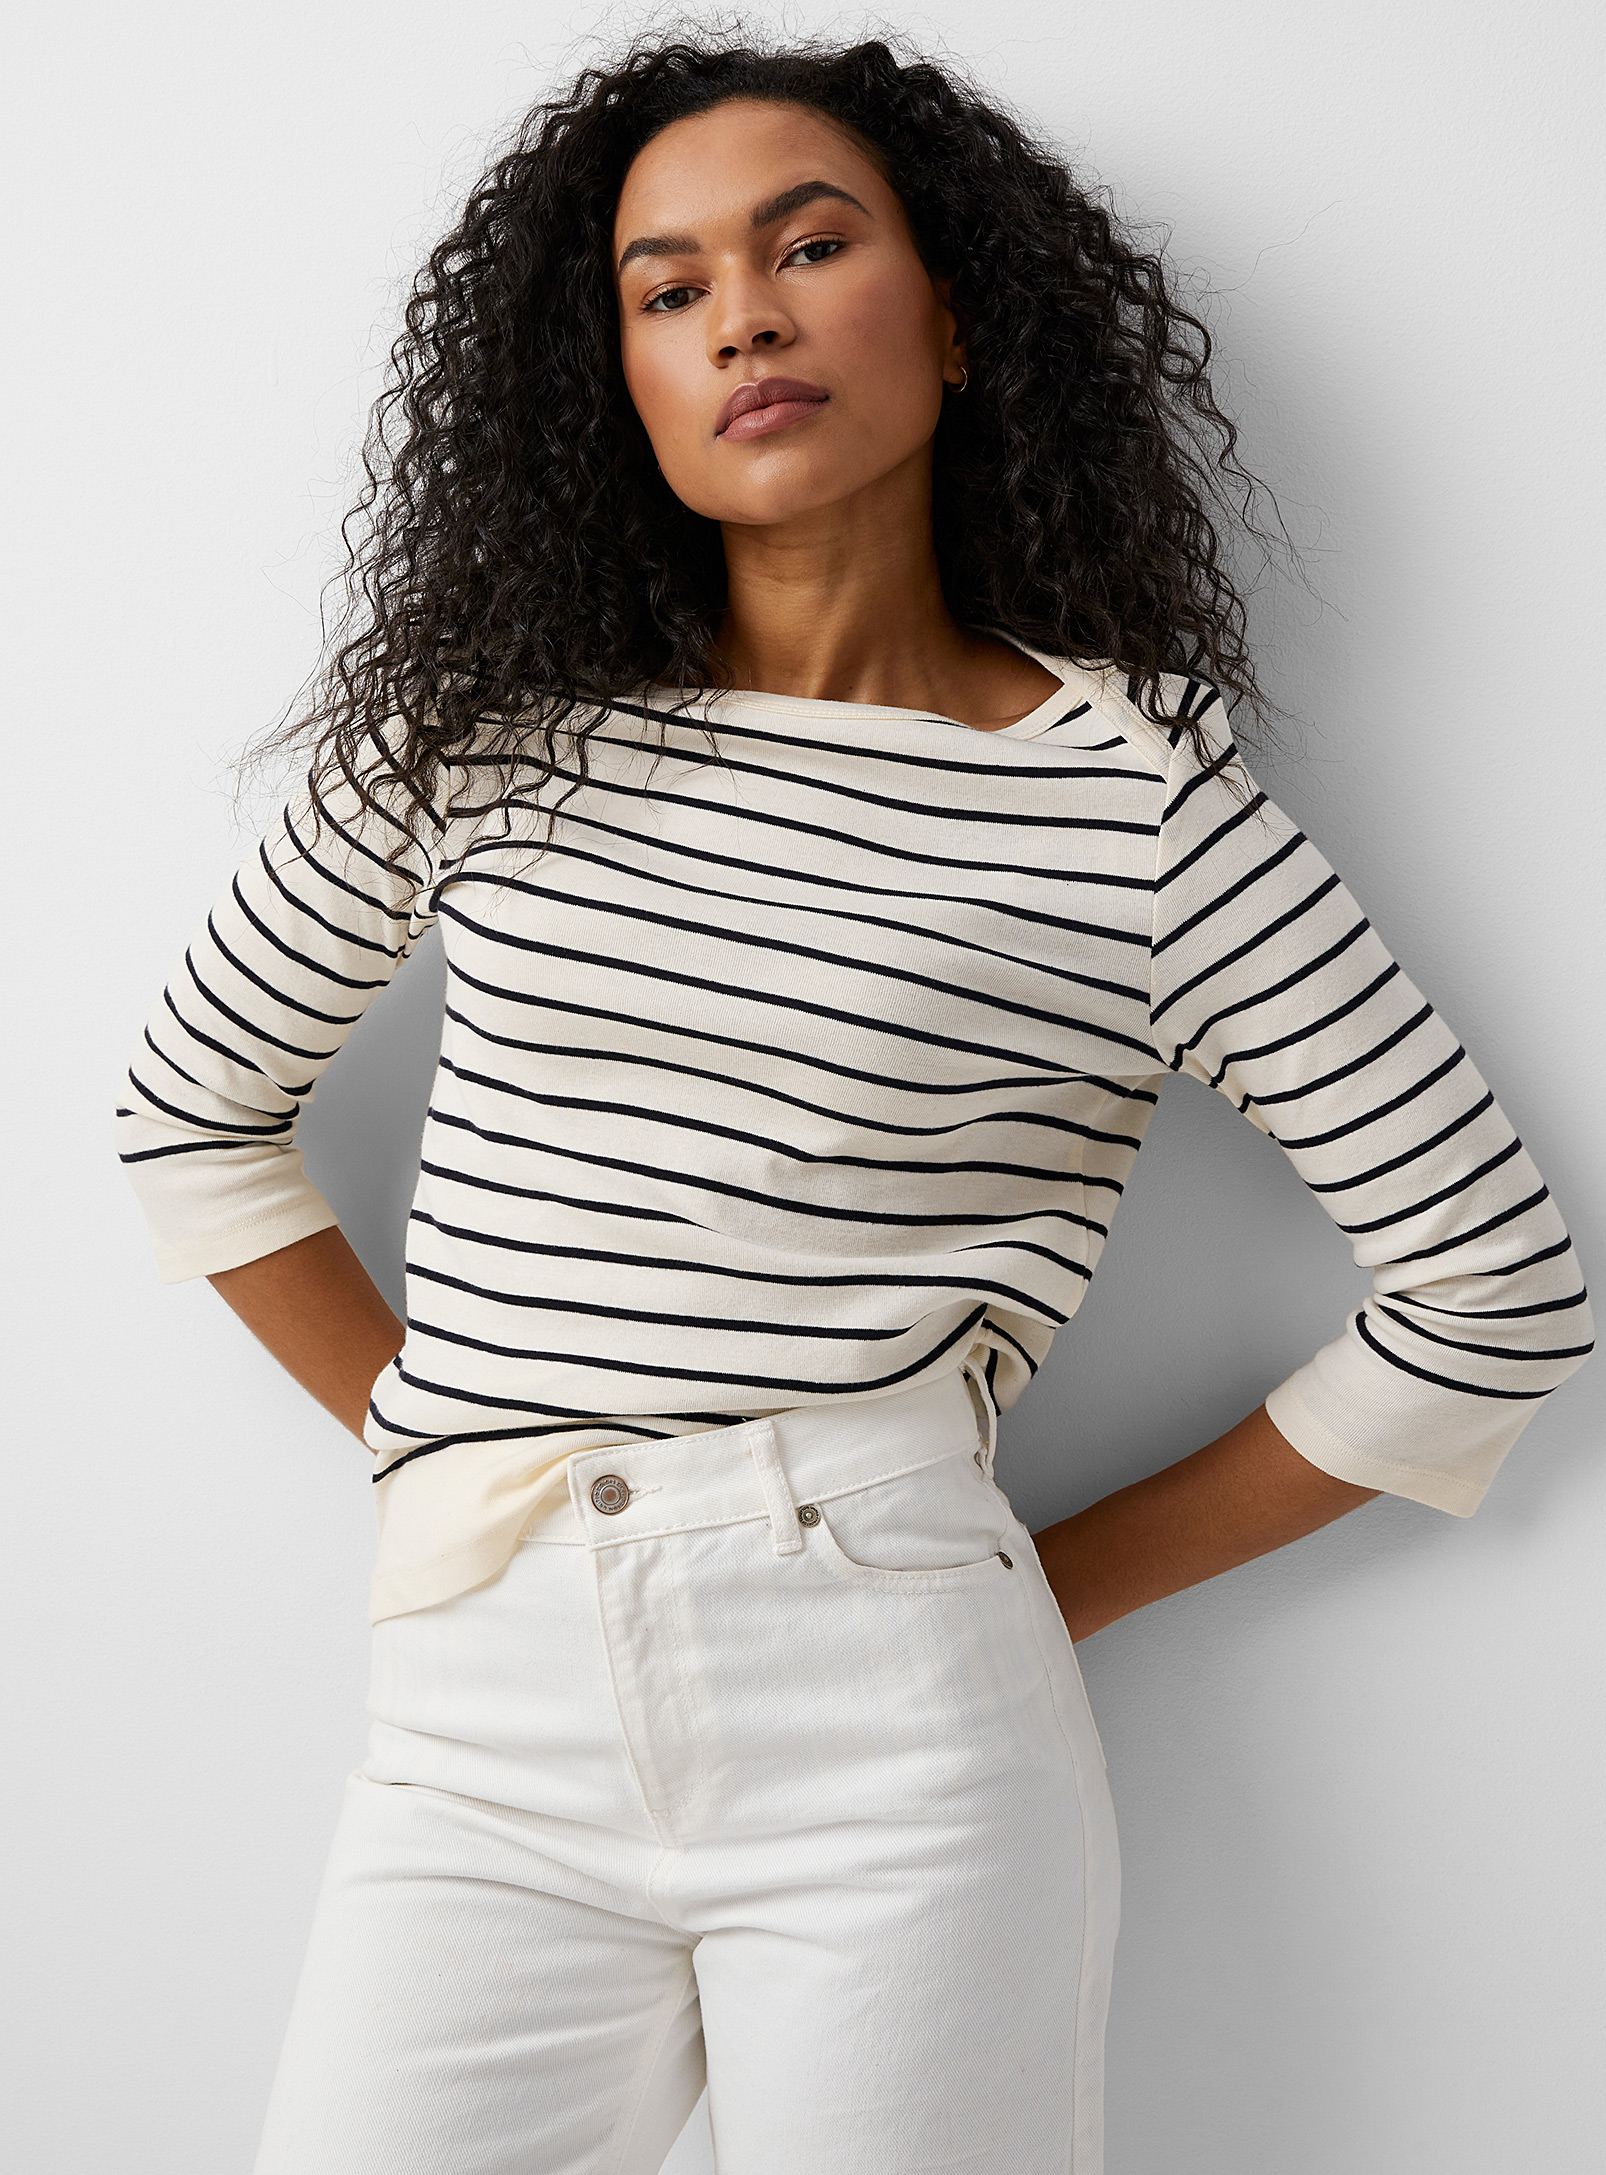 Contemporaine Boatneck Sailor T-shirt In Patterned White